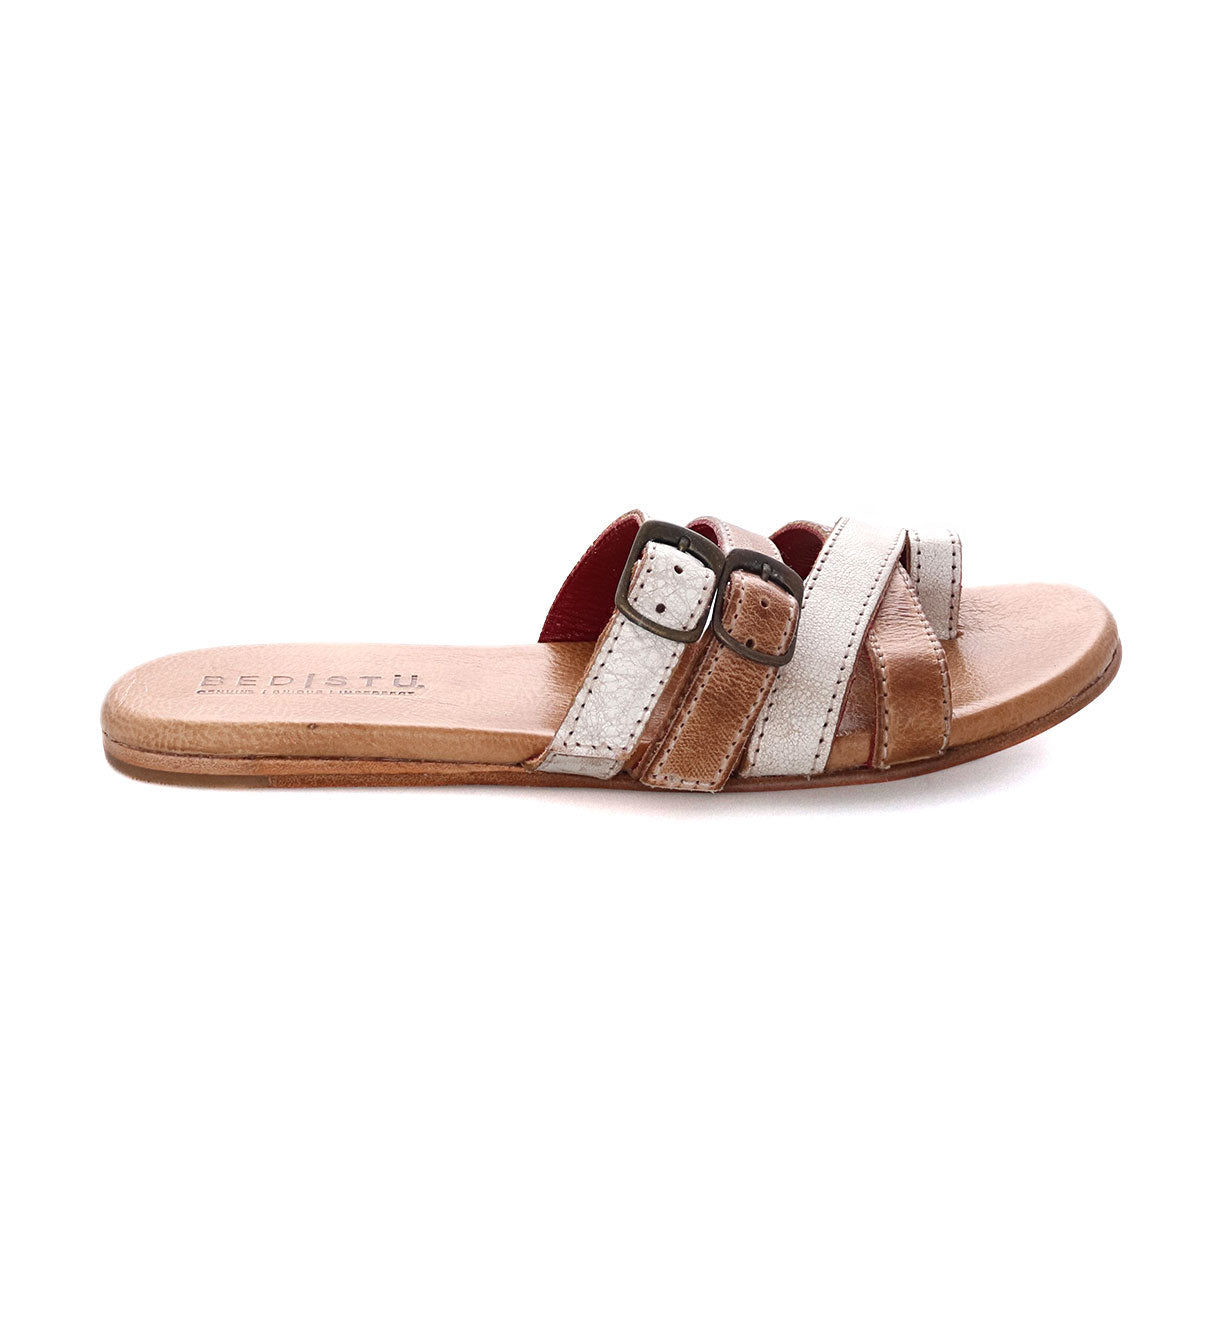 A Hilda sandal by Bed Stu with straps and buckles.